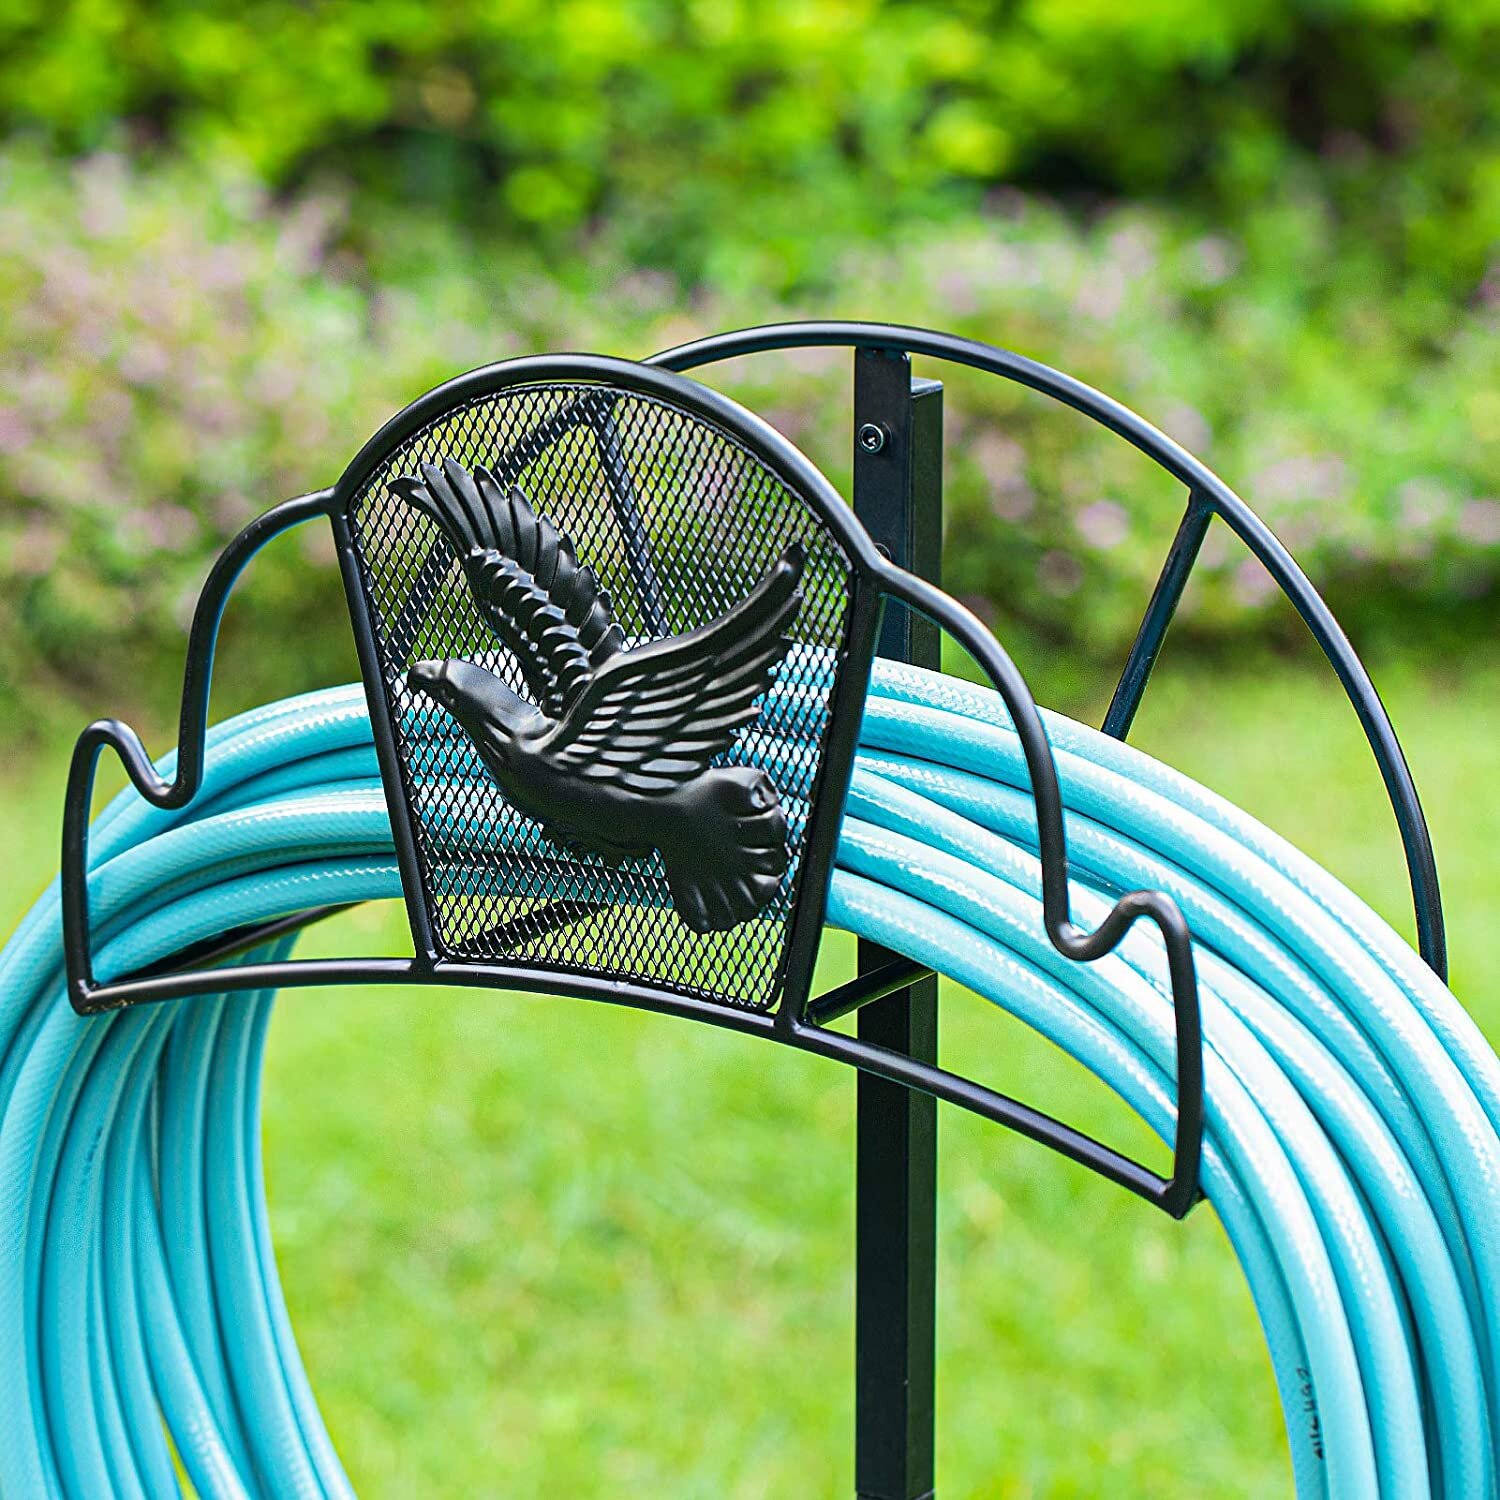 Amagabeli Garden Hose Holder Stand Freestanding Holds 125ft Water Hose Detachable Rustproof Hanger Organizer Storage Metal Heavy Duty Decorative with Ground Stakes for Outside Garden Lawn Yard Bronze 